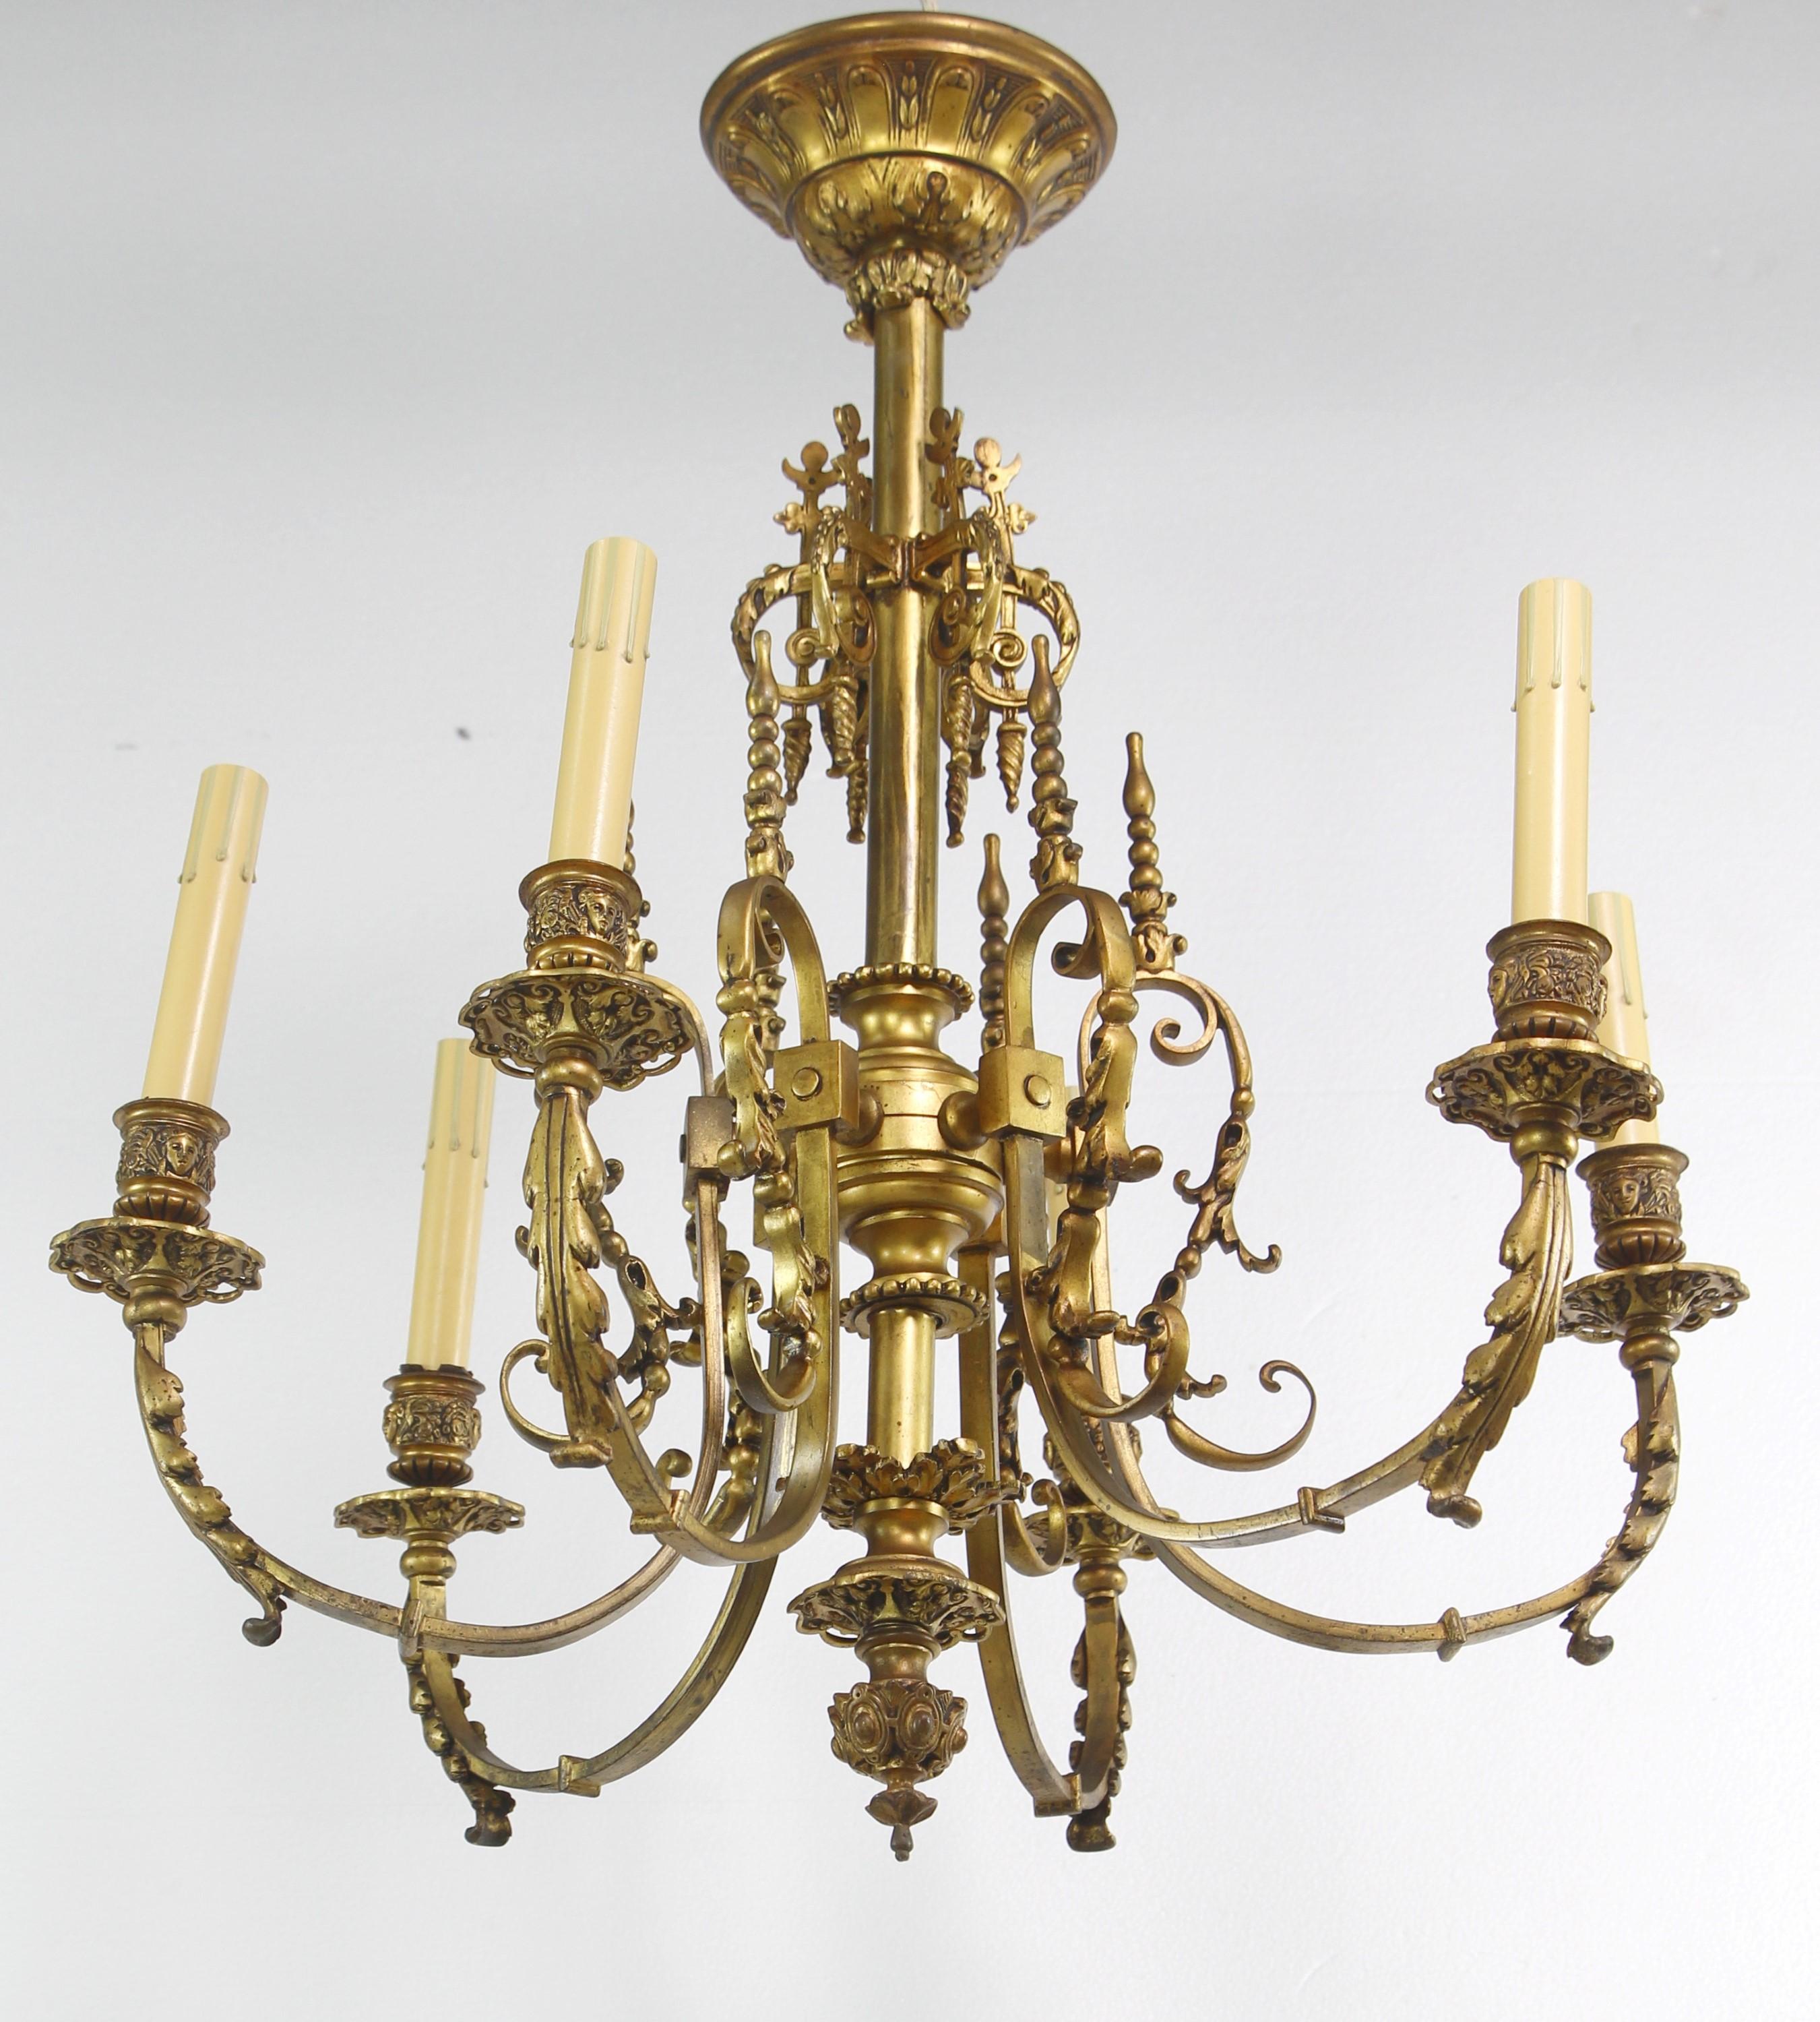 Heavy cast bronze French chandelier with intricate details from the 19th century. Cleaned and restored. Takes 6 candelabra size light bulbs.  Please note, this item is located in one of our NYC locations.